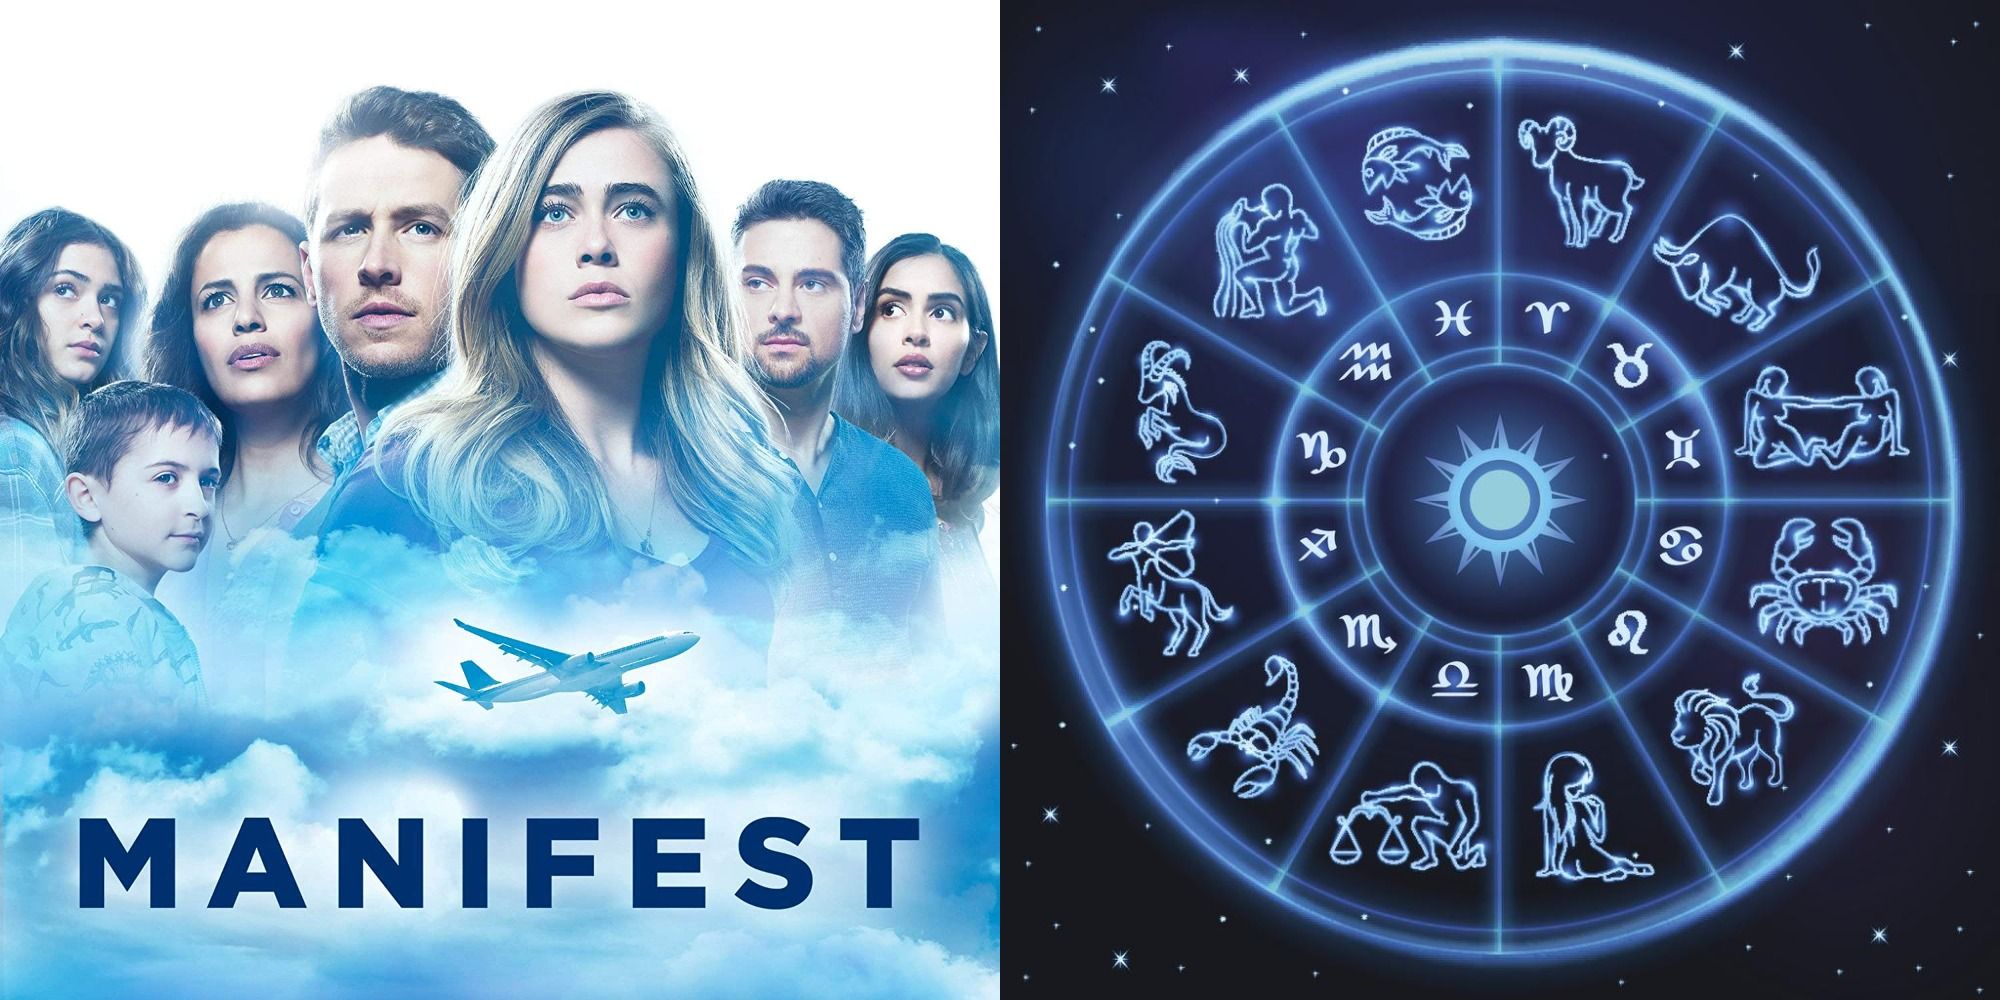 Split image showing the poster for Manifest and a zodiac wheel